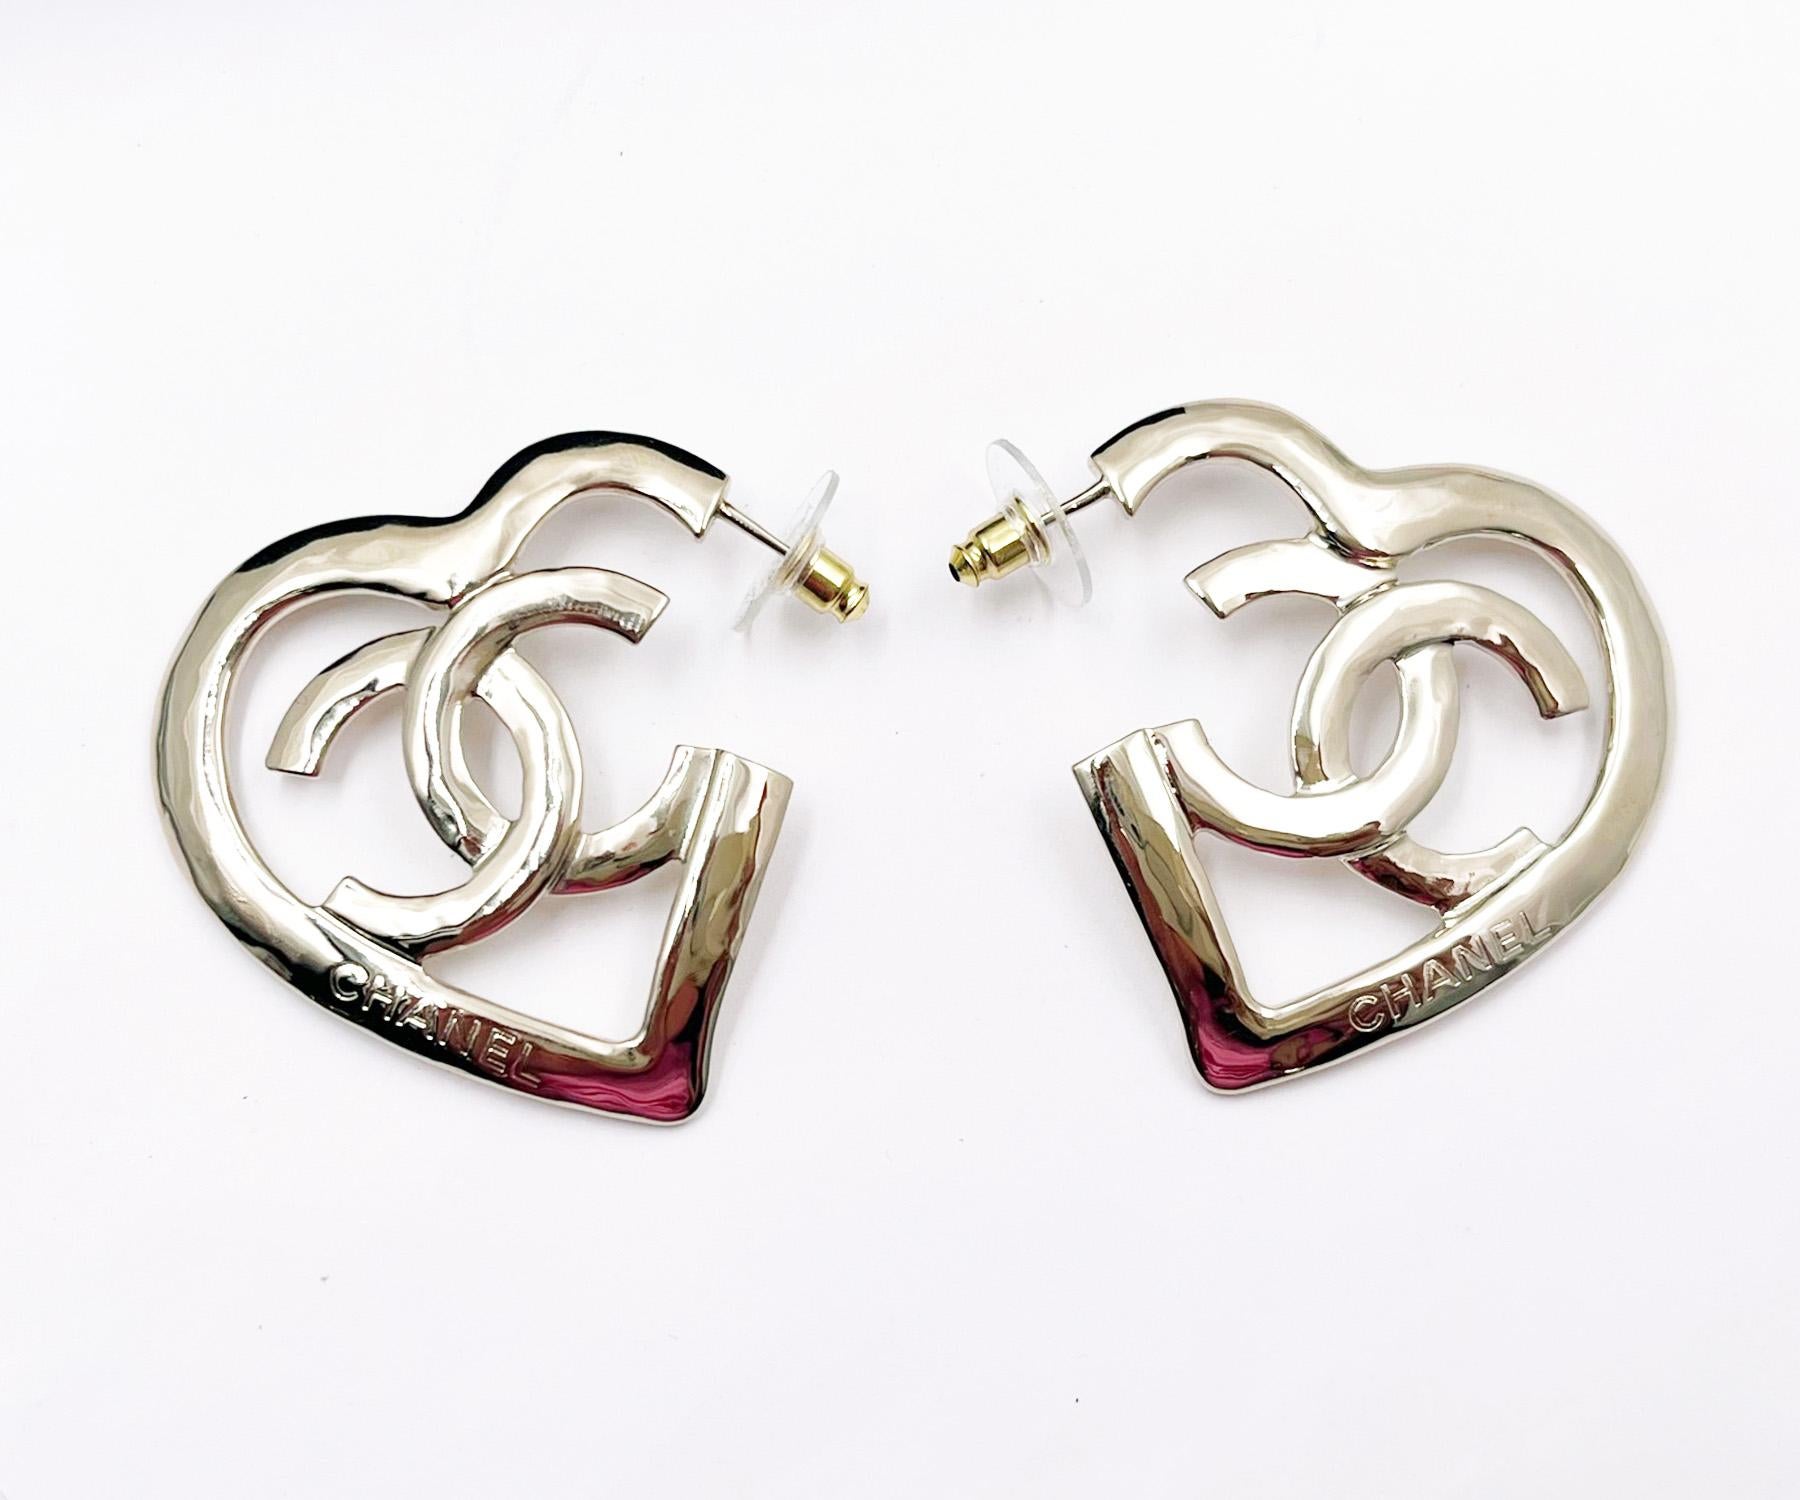 Chanel Brand New Light Gold Open Heart Large Piercing Earrings

*Marked 22
*Made in Italy
*Comes with the original box, pouch, tag, booklet, ribbon and camellia

-It is approximately 2